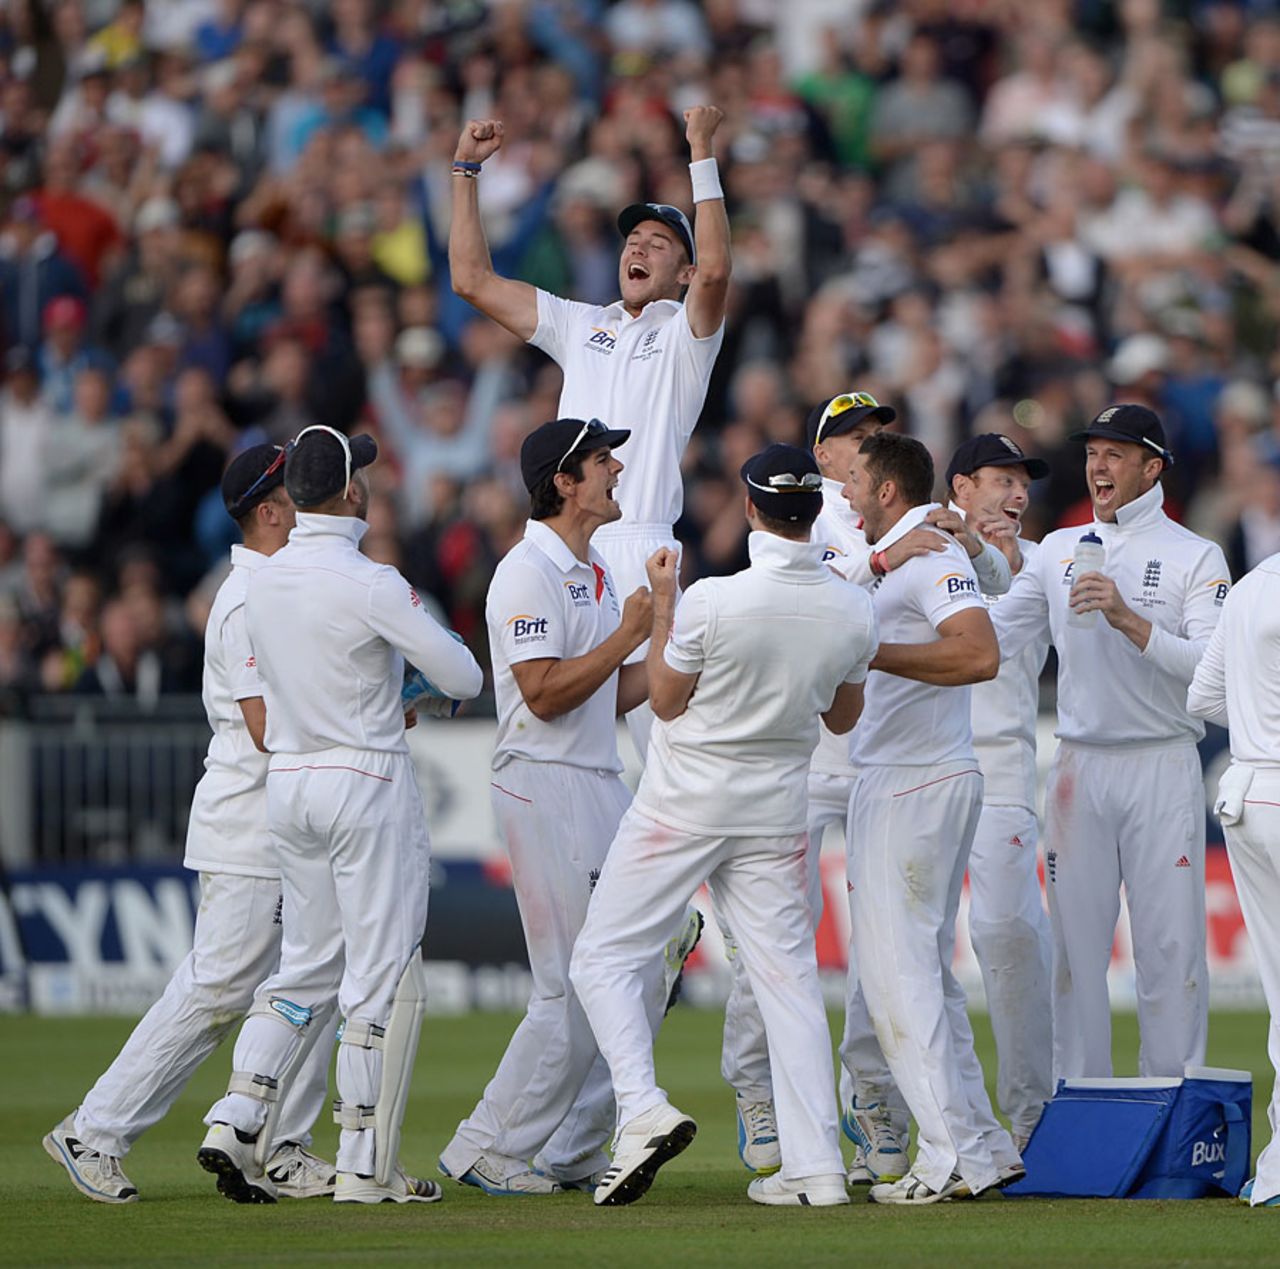 England celebrate as Shane Watson is confirmed as out, England v Australia, 4th Investec Test, 4th day, Chester-le-Street, August 12, 2013